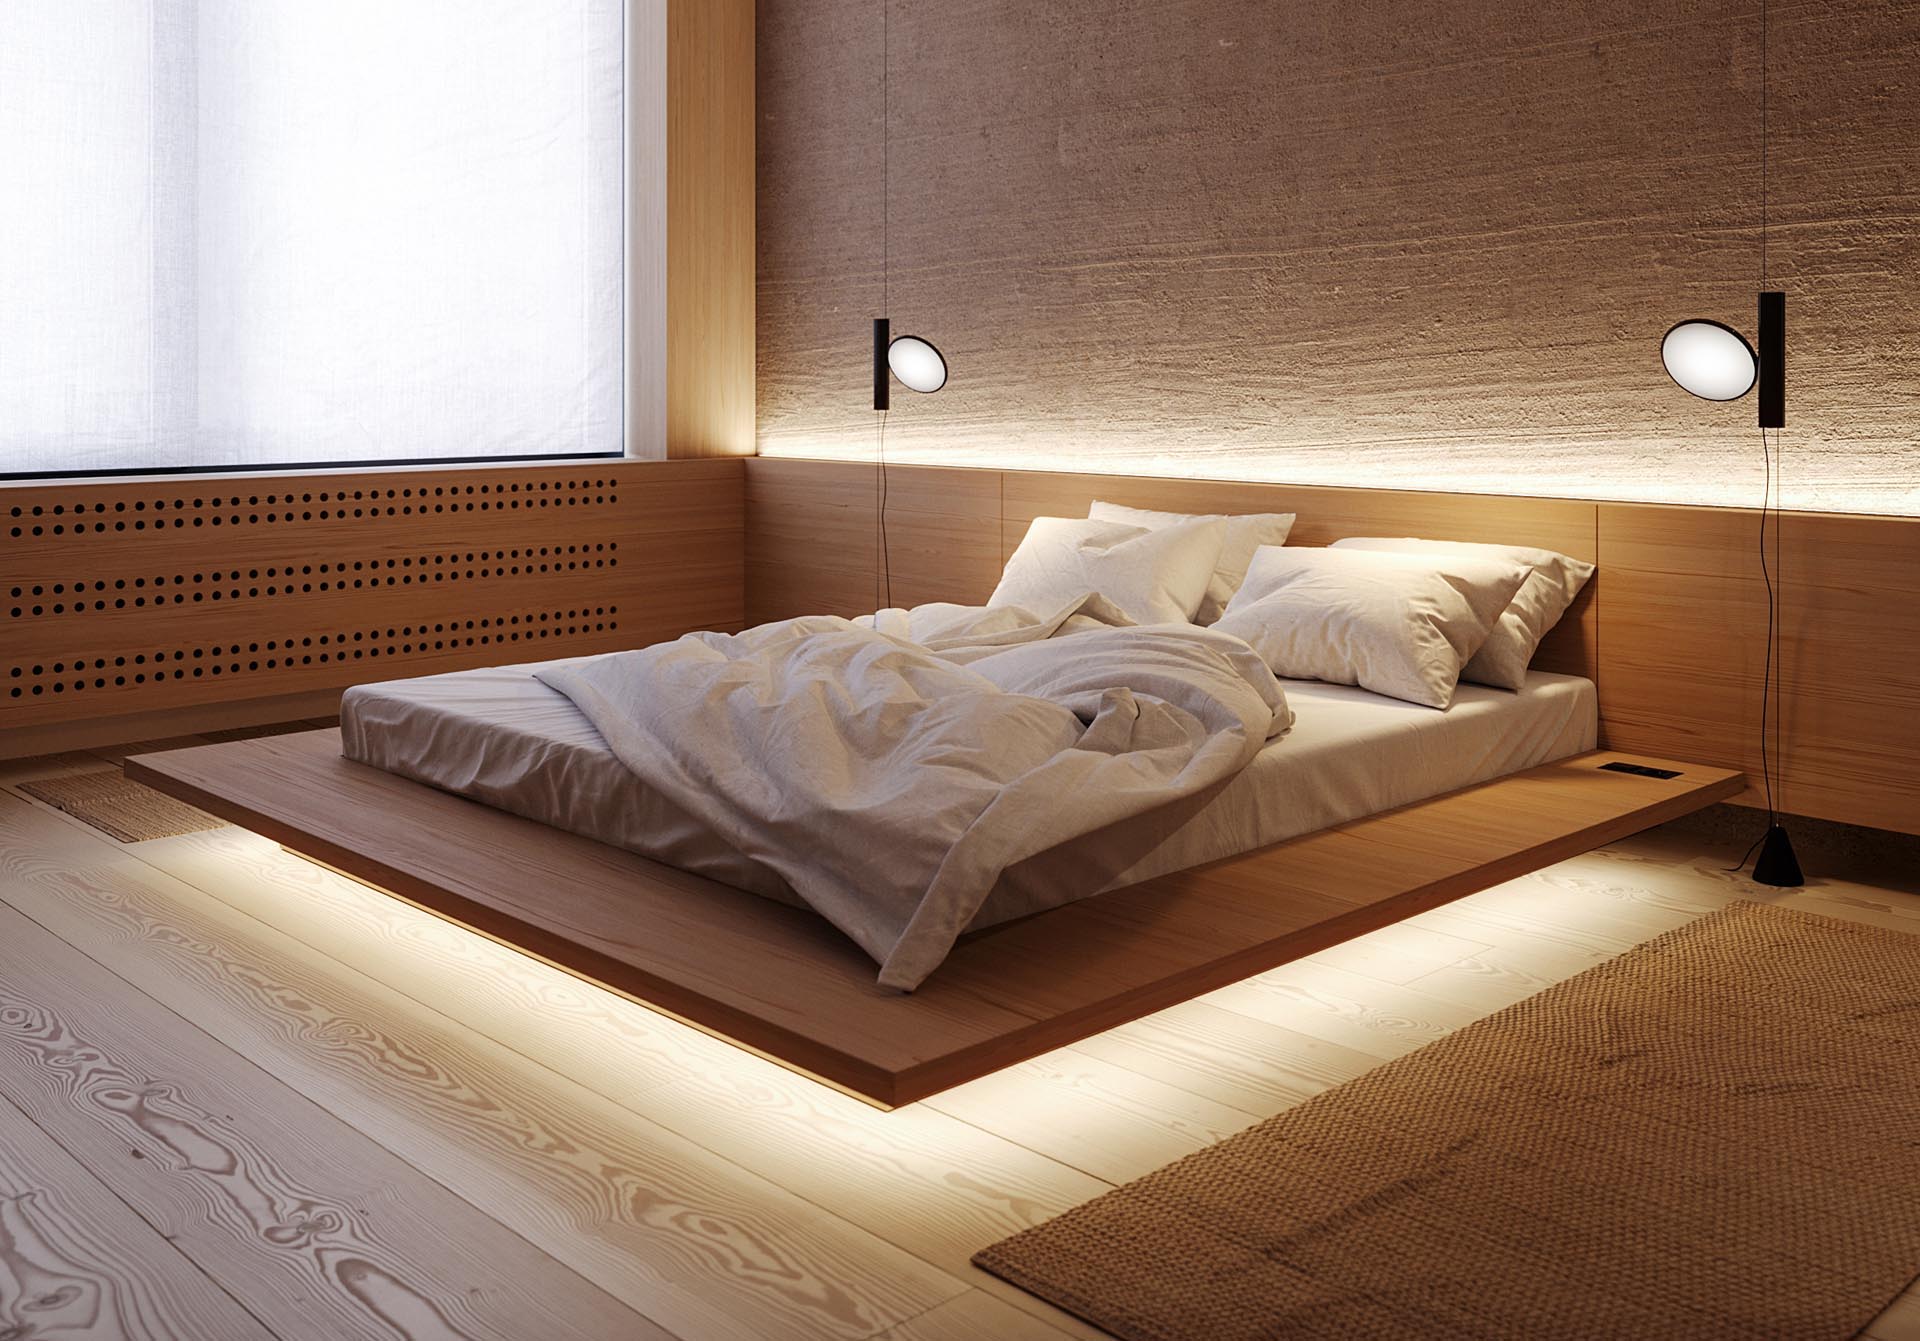 A modern bedroom that uses wood furniture and LED lighting to create a warm and calming environment.